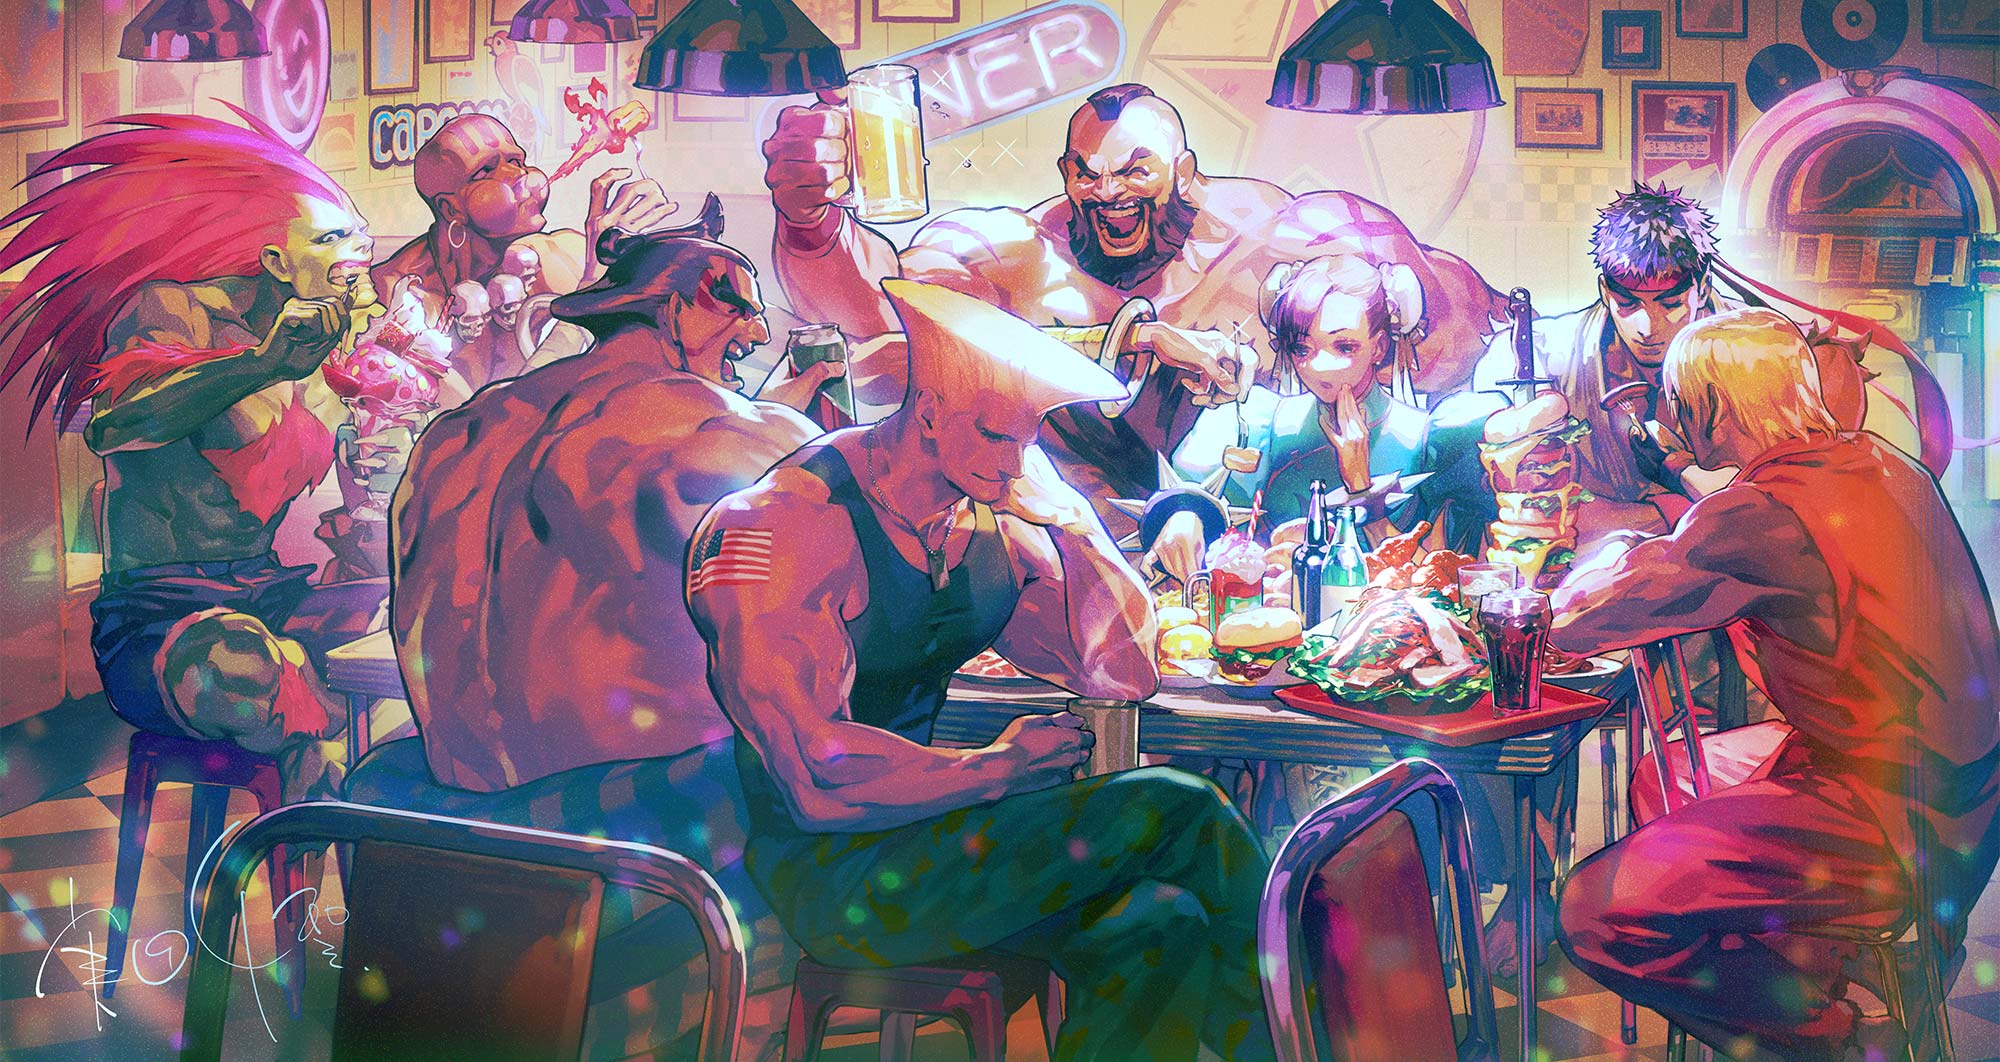 The Fighters Generation - 🌏 Street Fighter 35th Anniversary art